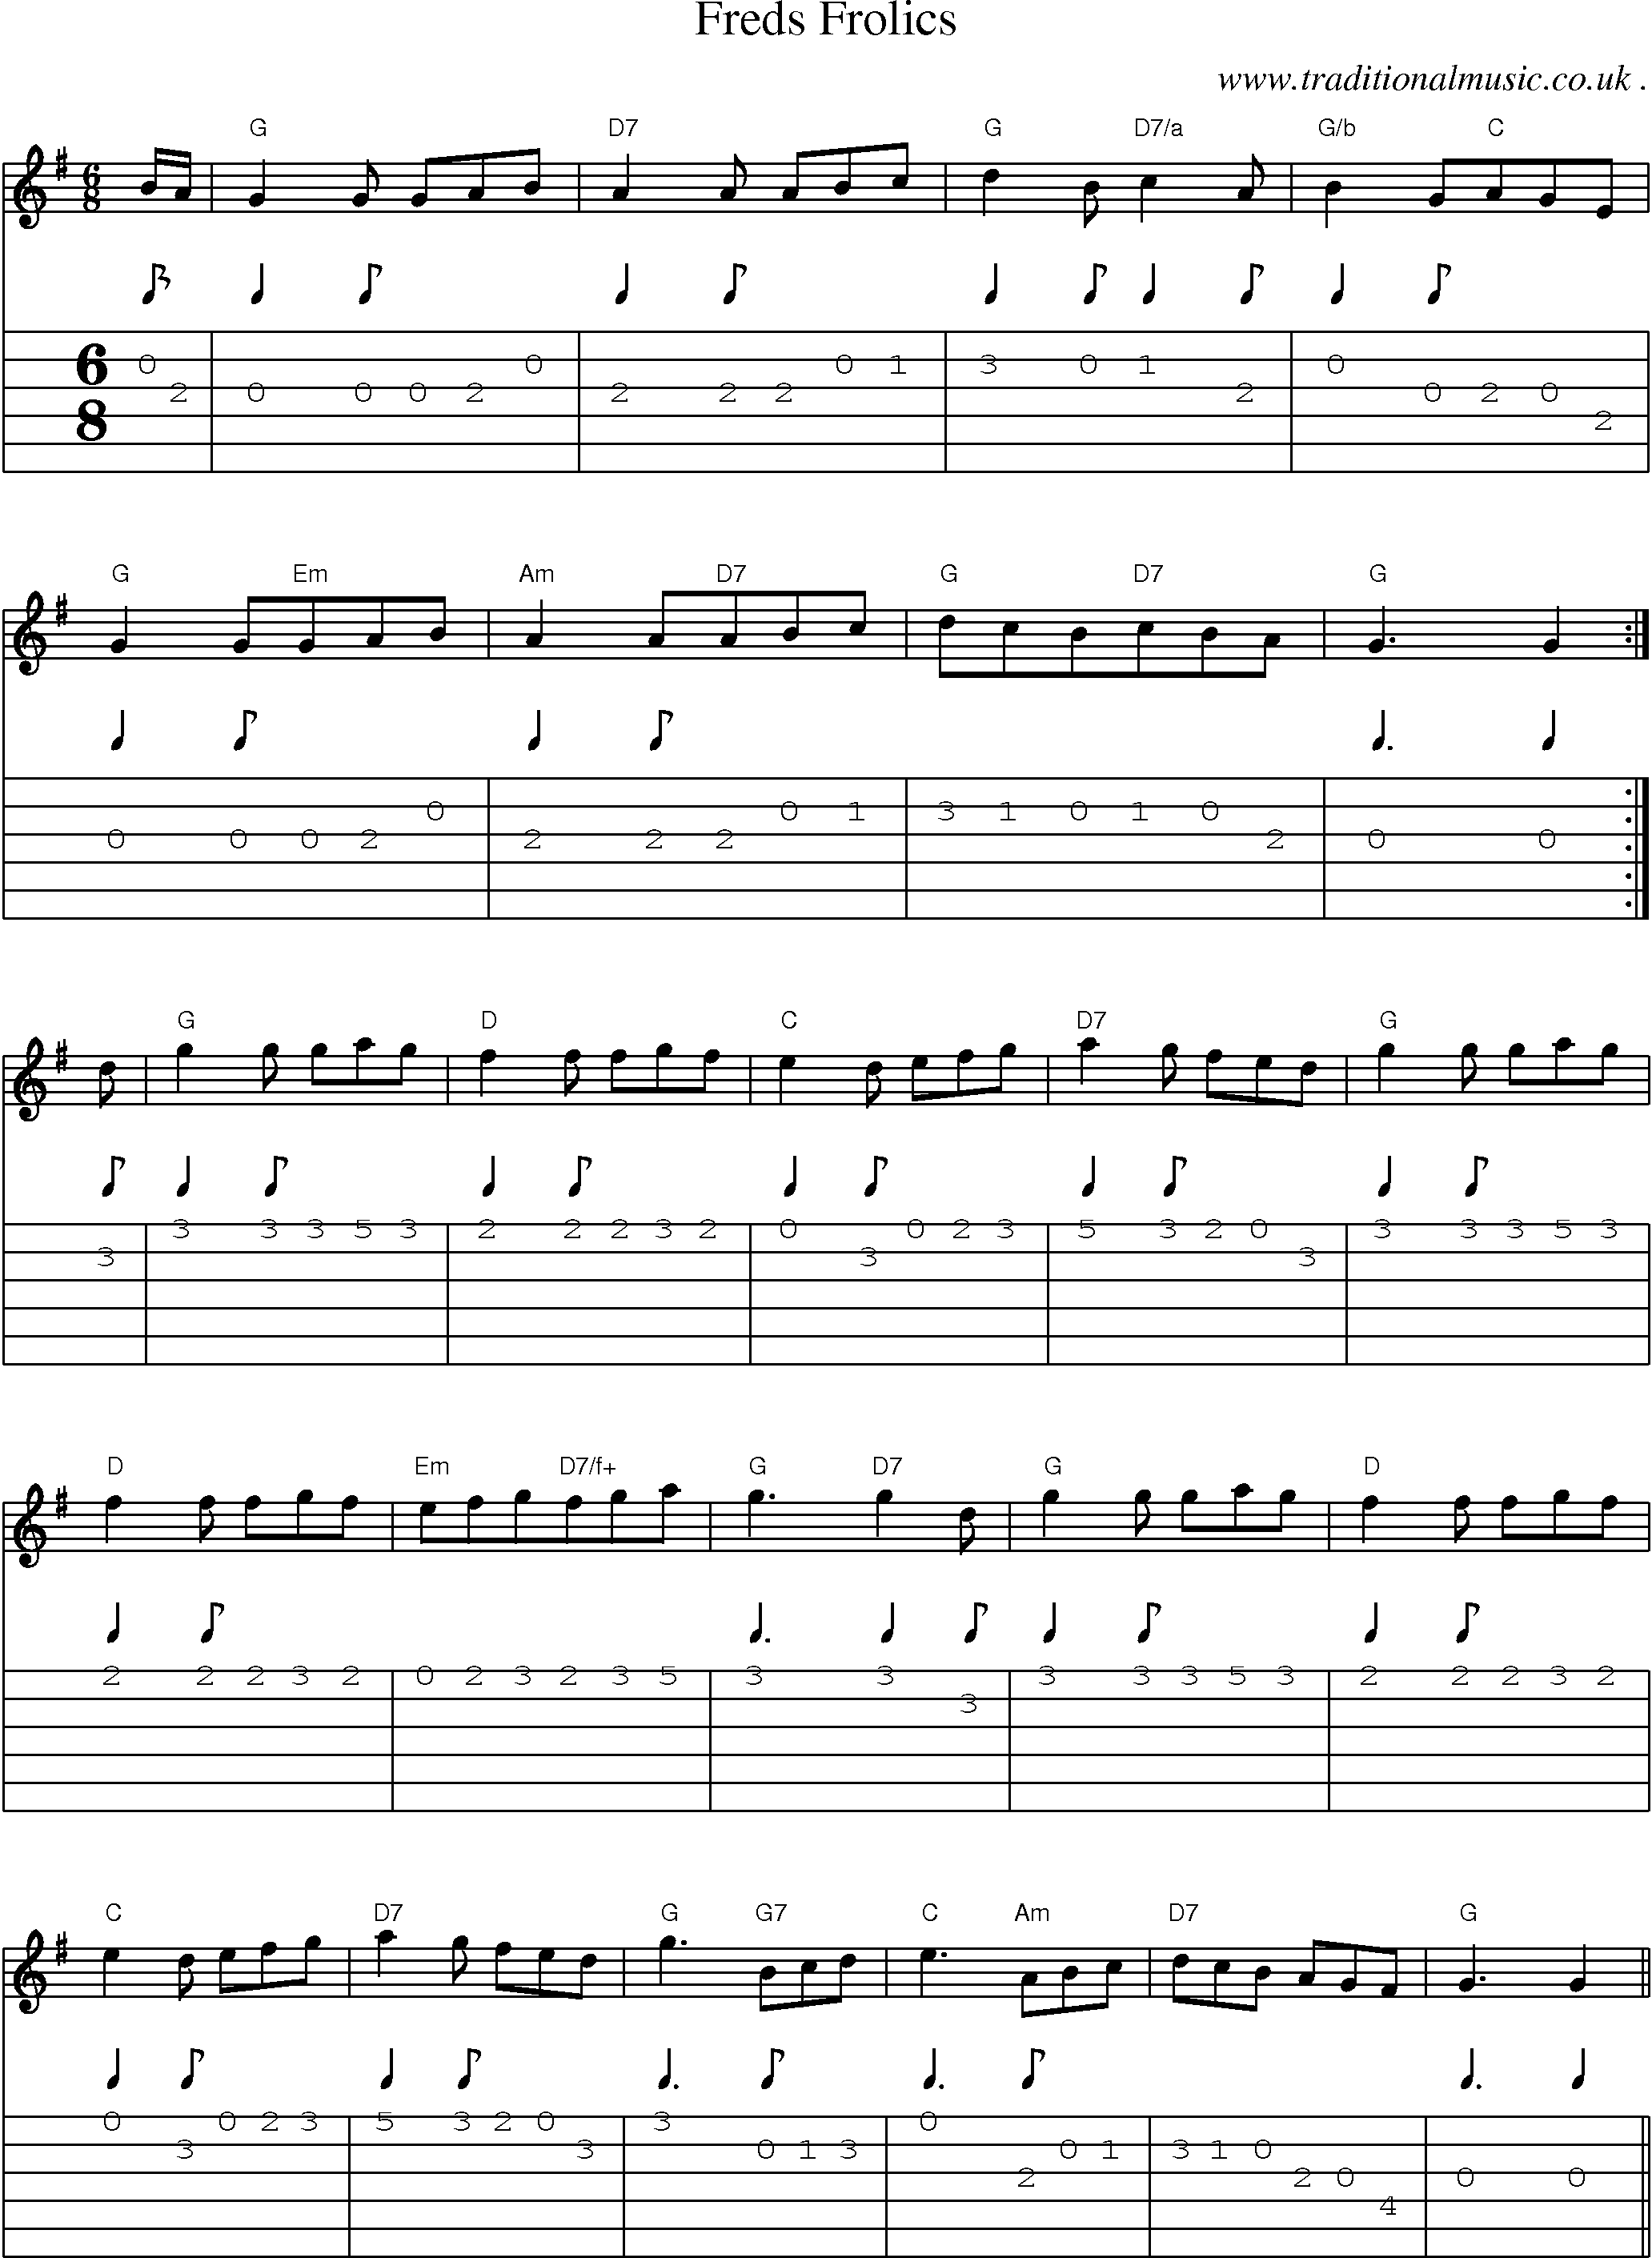 Sheet-Music and Guitar Tabs for Freds Frolics